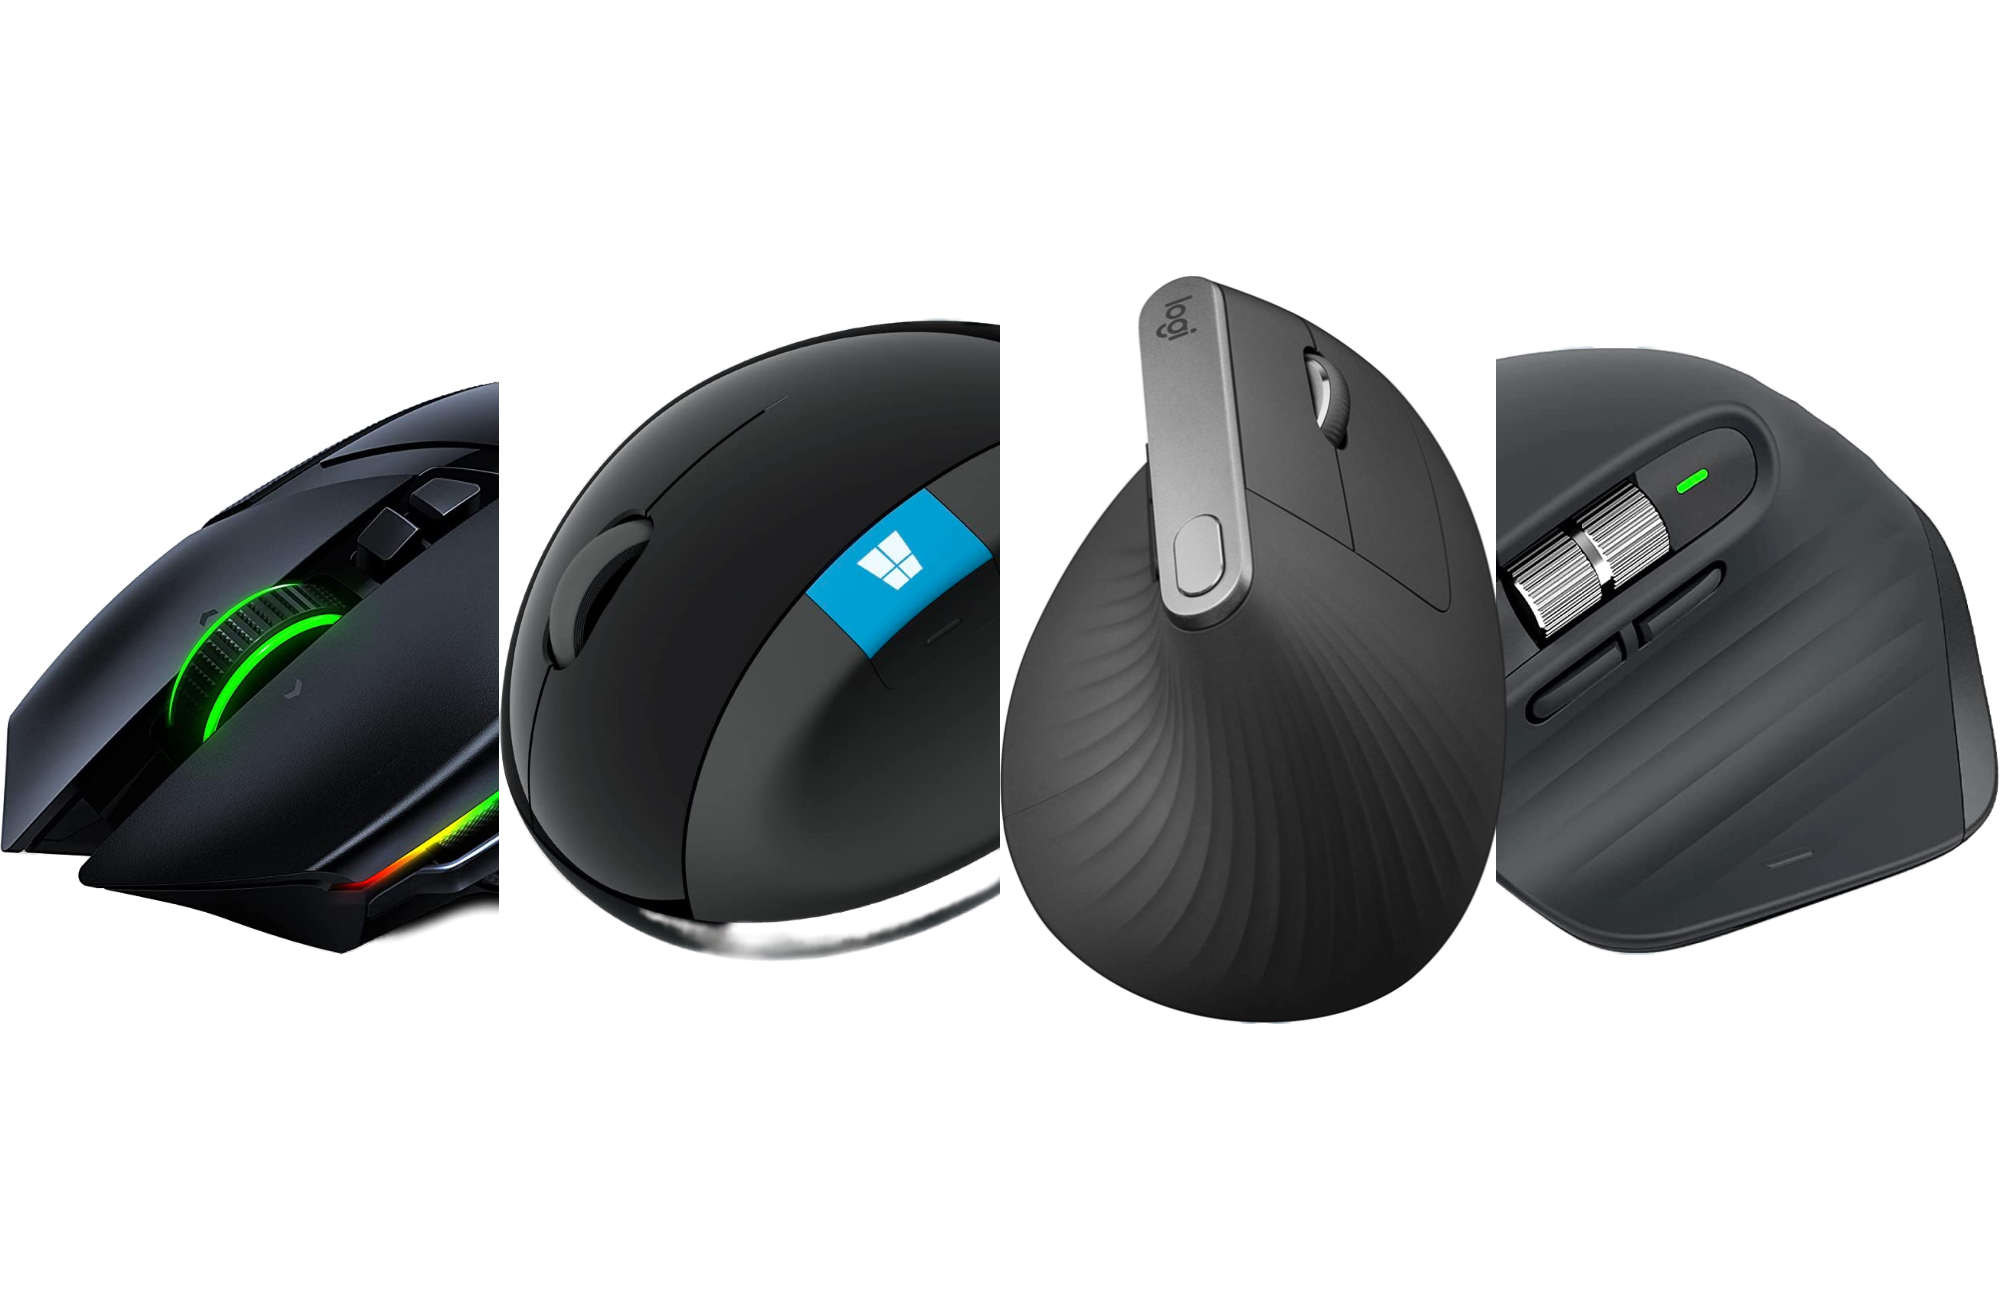 Logitech Lift review: A small vertical wireless mouse for the masses